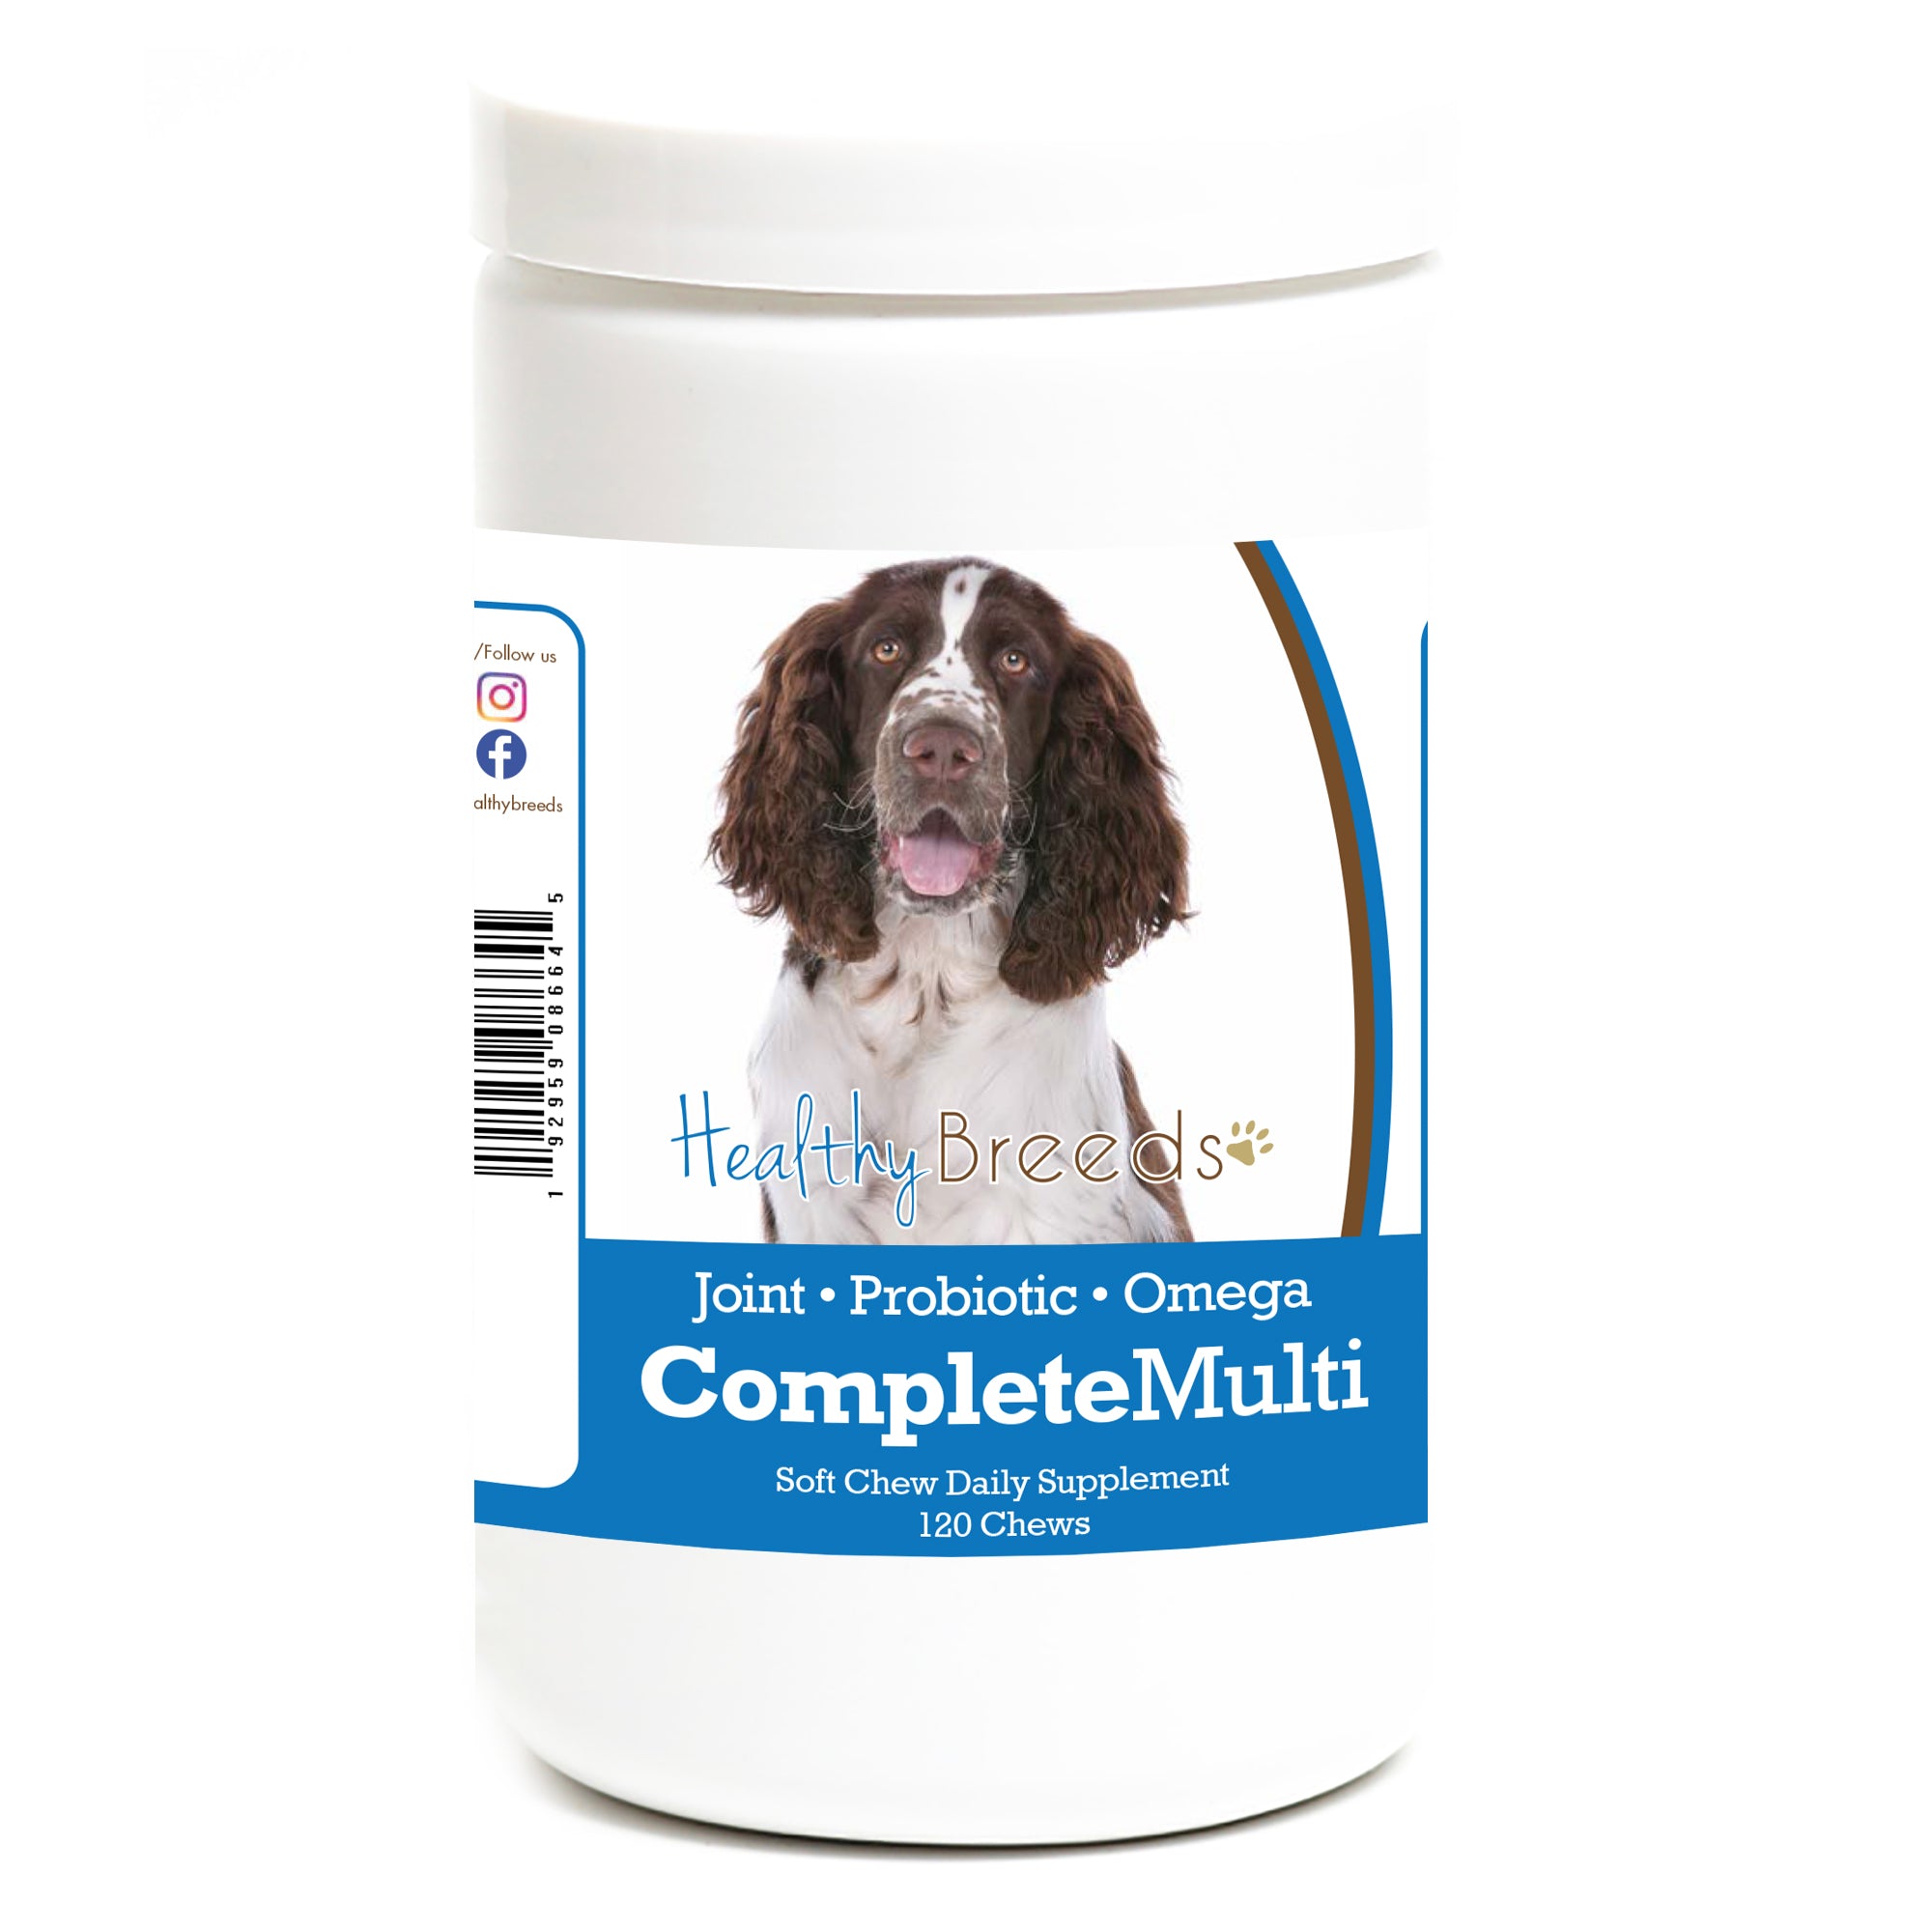 English Springer Spaniel All In One Multivitamin Soft Chew 120 Count